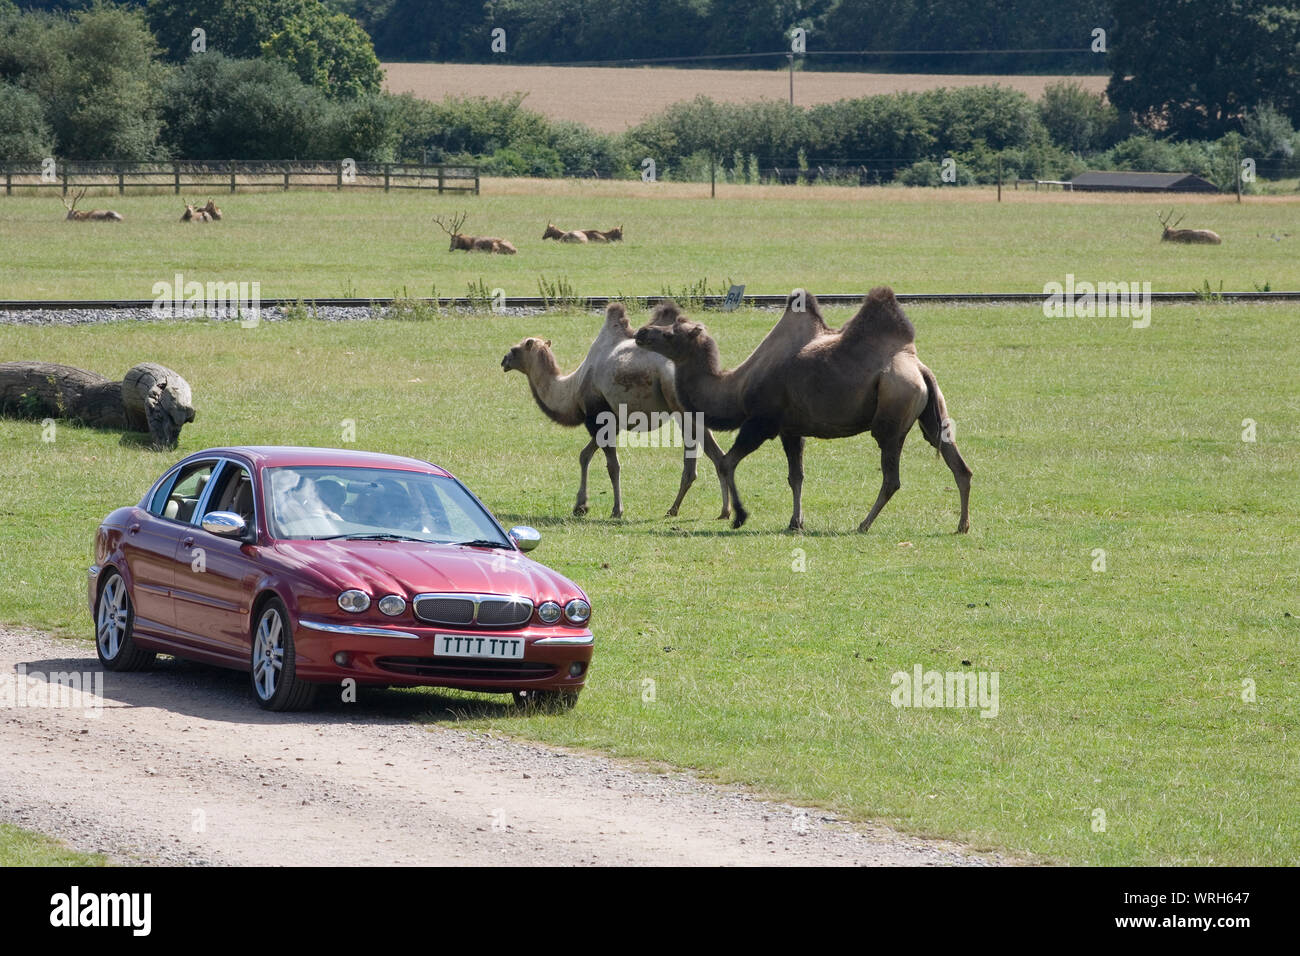 Red car on 'Passage through Asia' safari drive near bactrian camels with Pere David's deer in distance Stock Photo